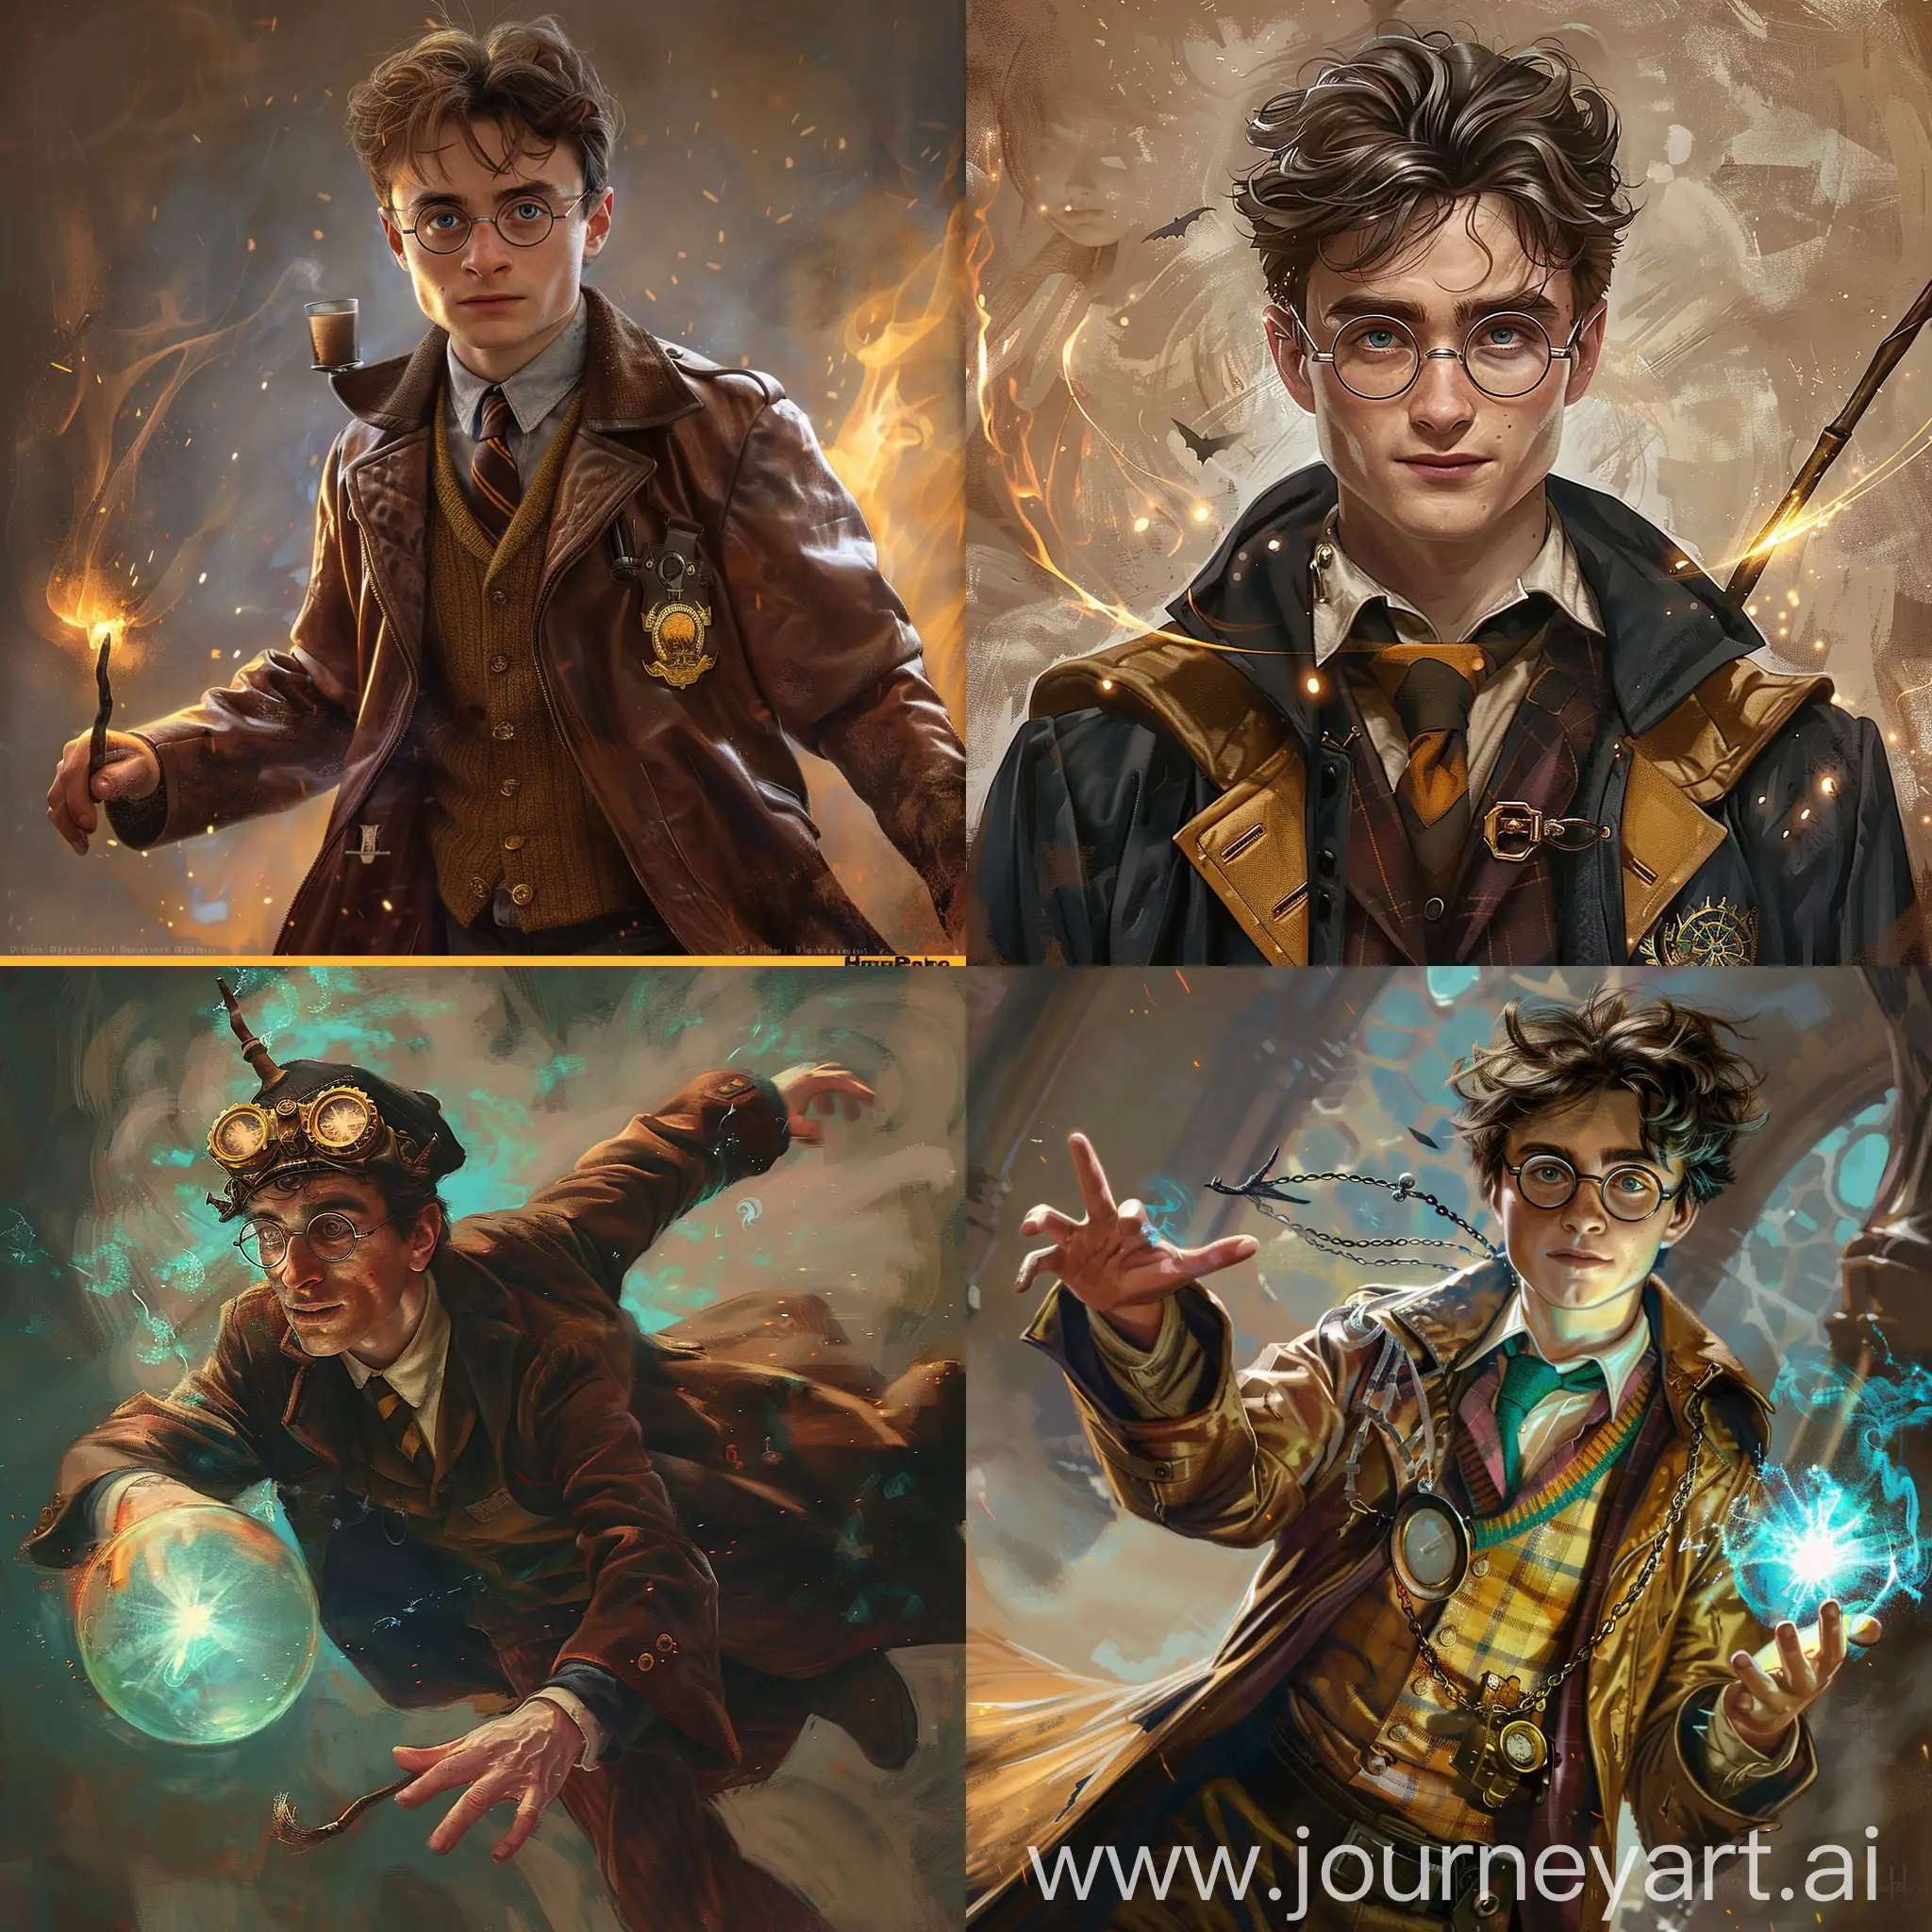 Steampunk-Harry-Potter-Character-Summoning-Patronus-for-Quidditch